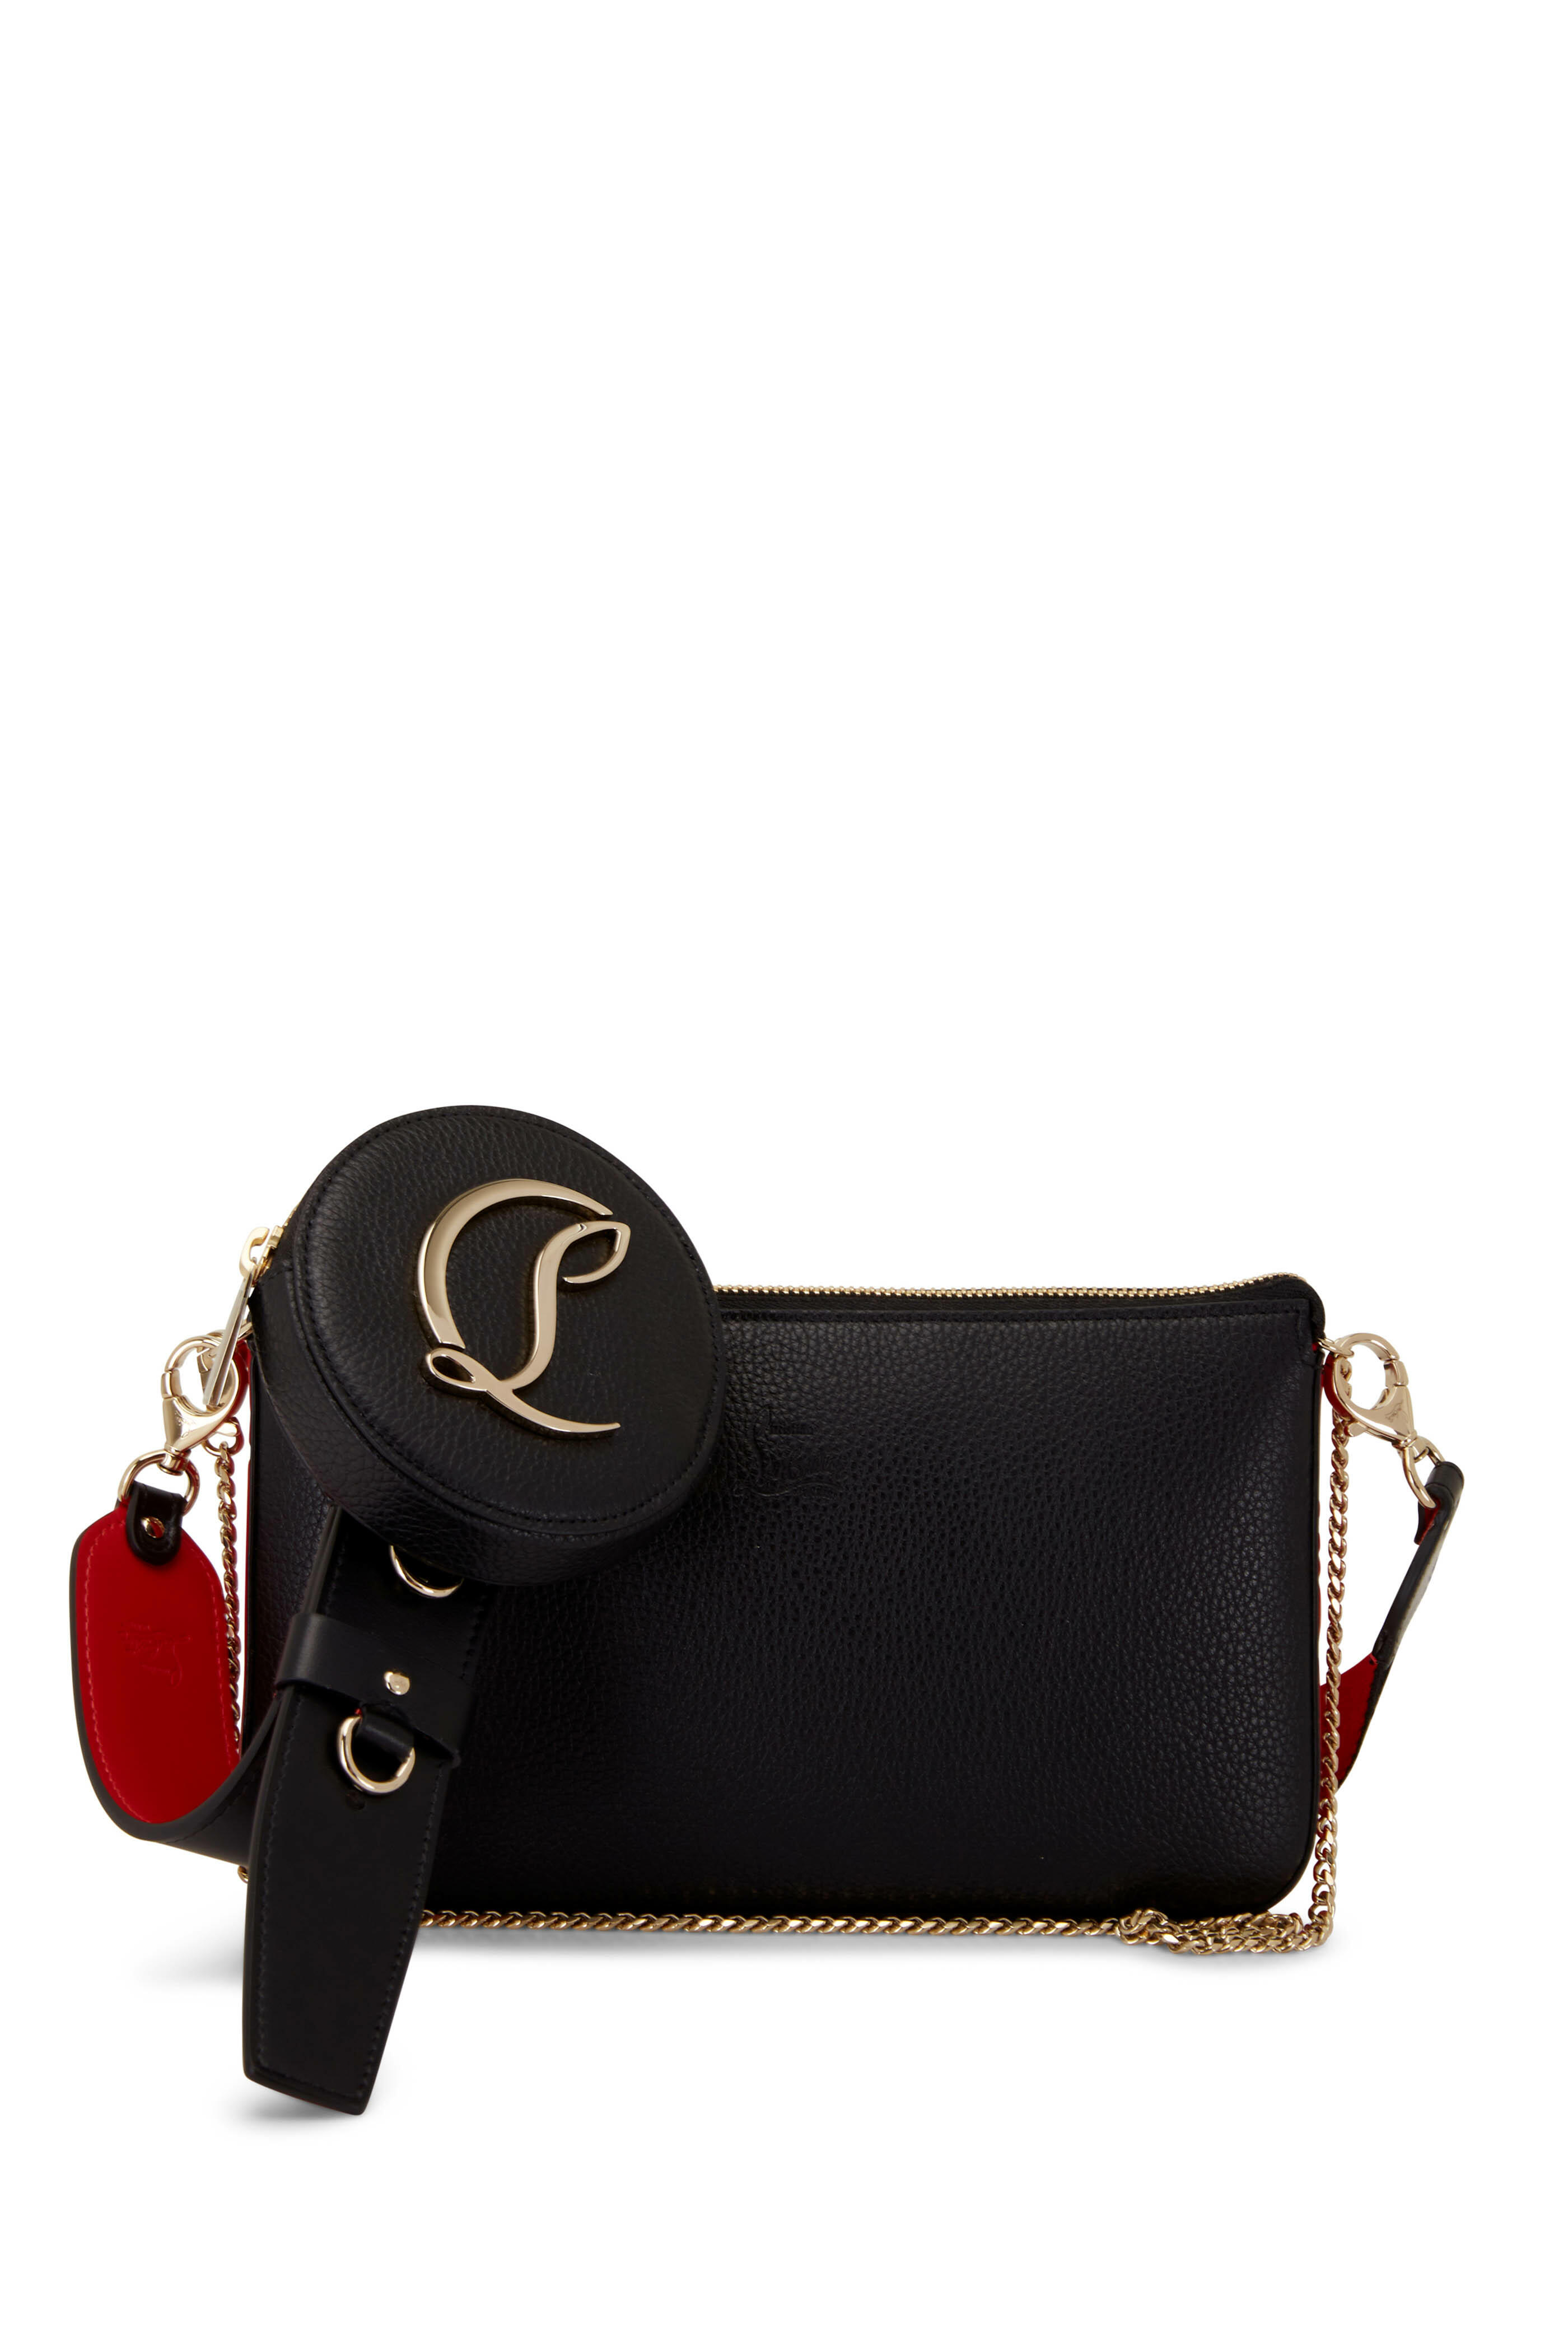 CHRISTIAN LOUBOUTIN Logo-Debossed Leather and PU Billfold Wallet